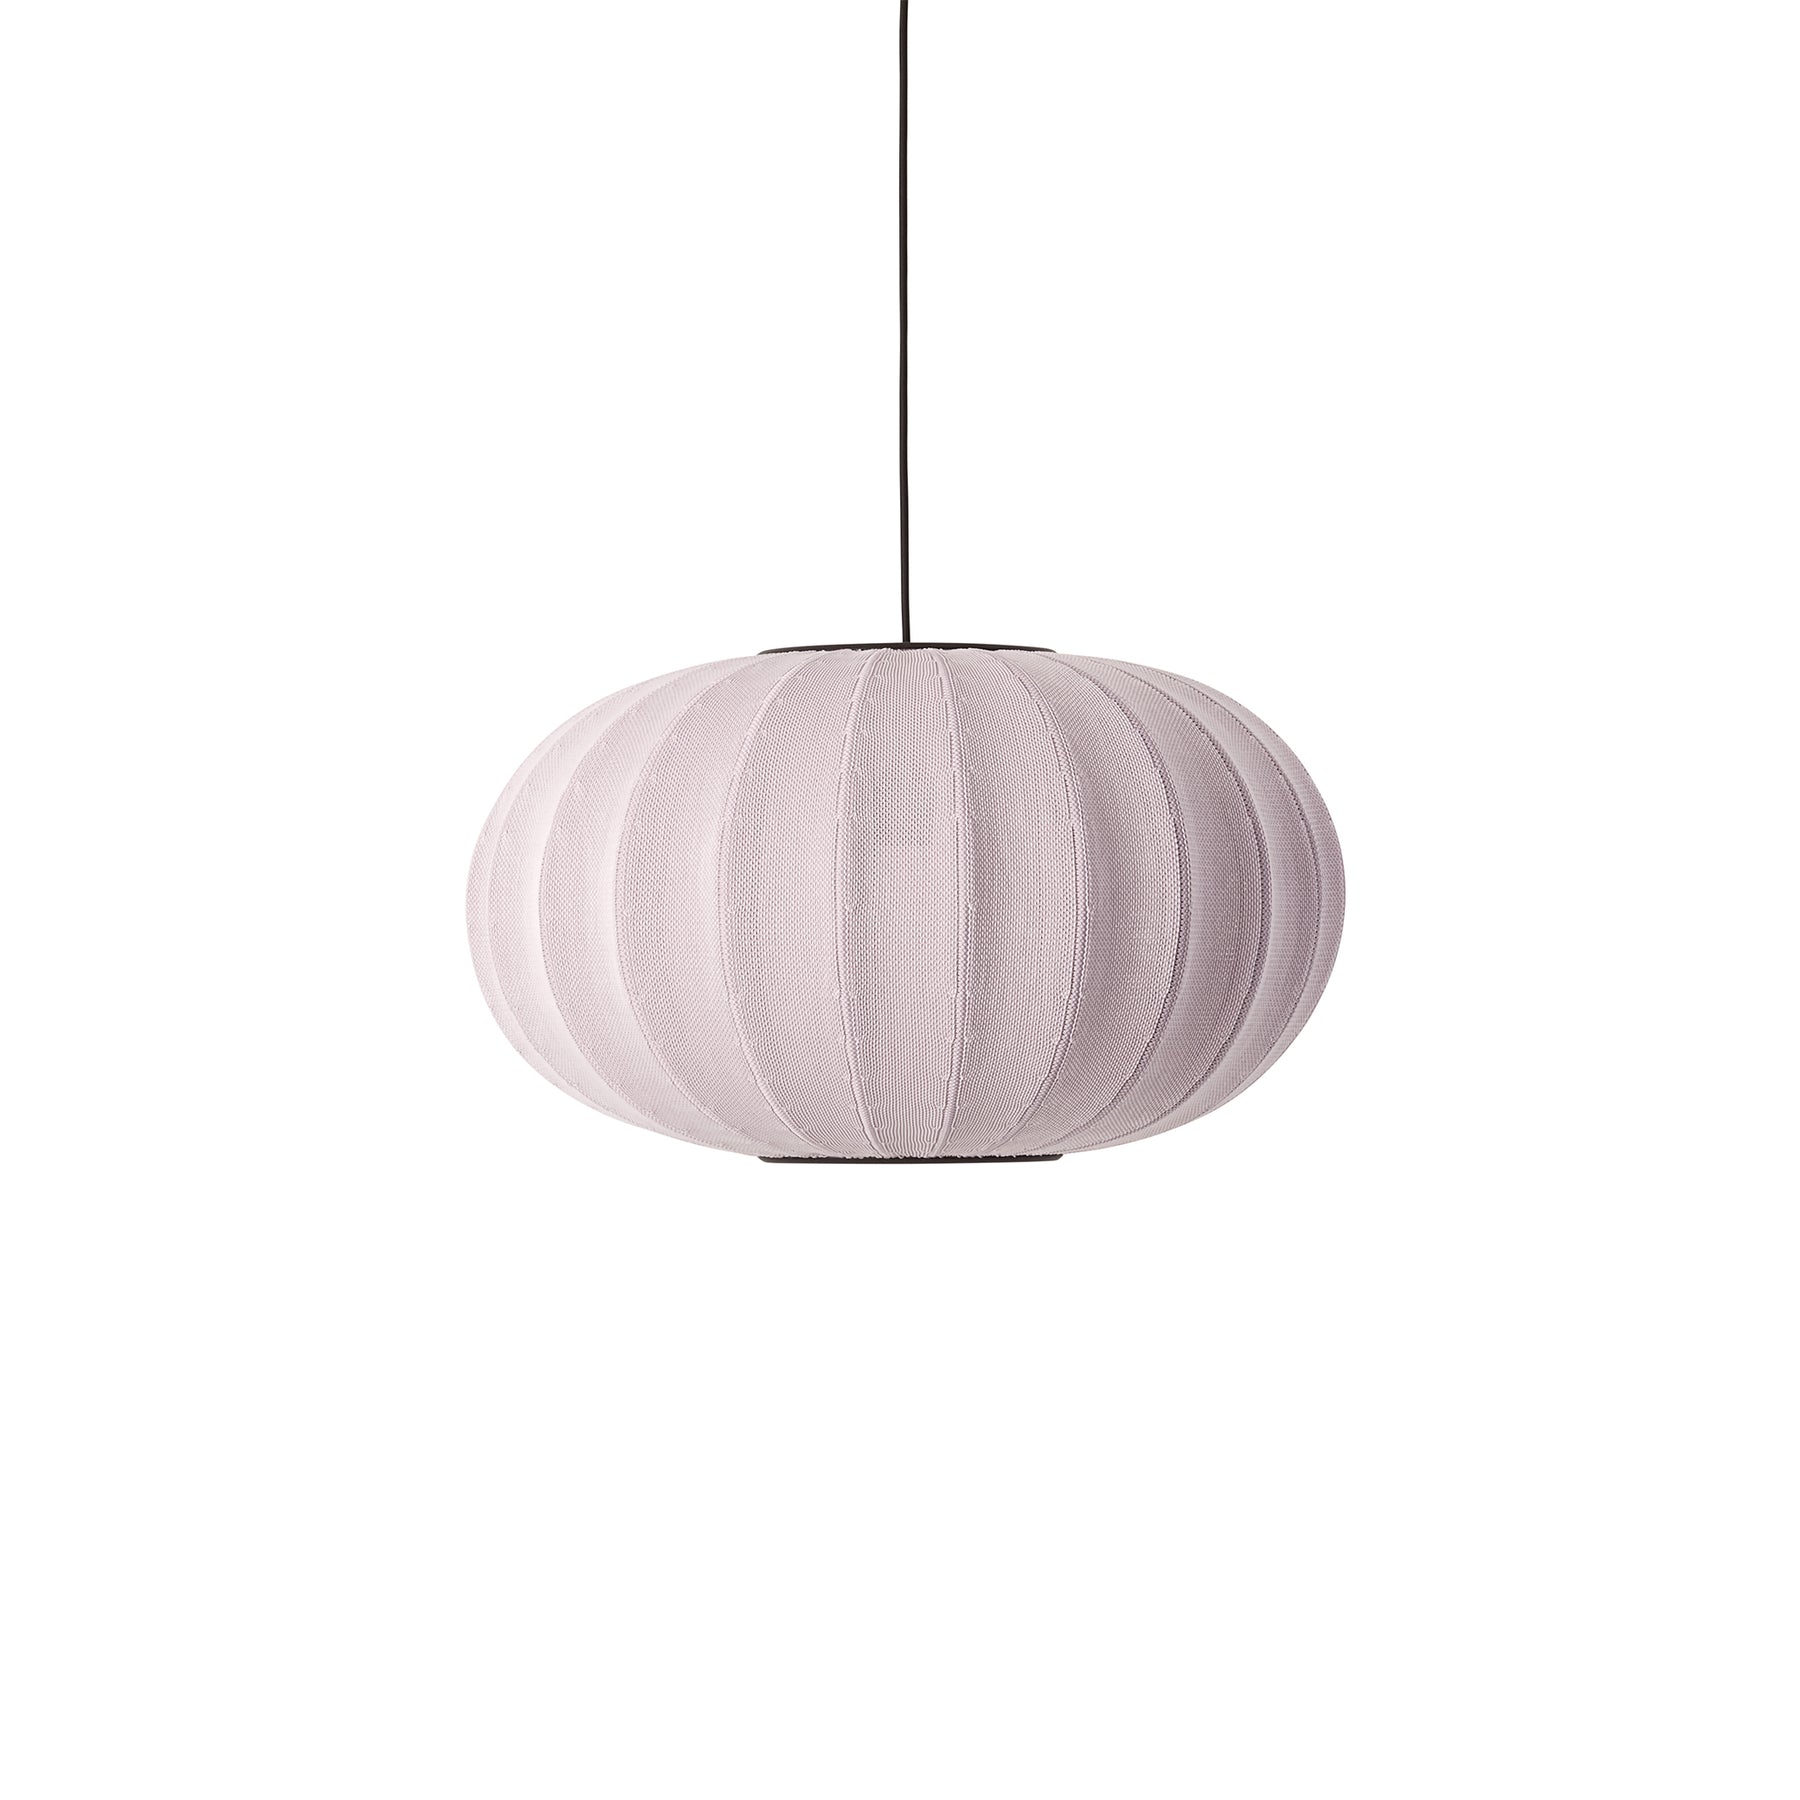 Made by Hand, Knit-Wit Oval Pendant Lamp 57, Sandstone, Pendant,